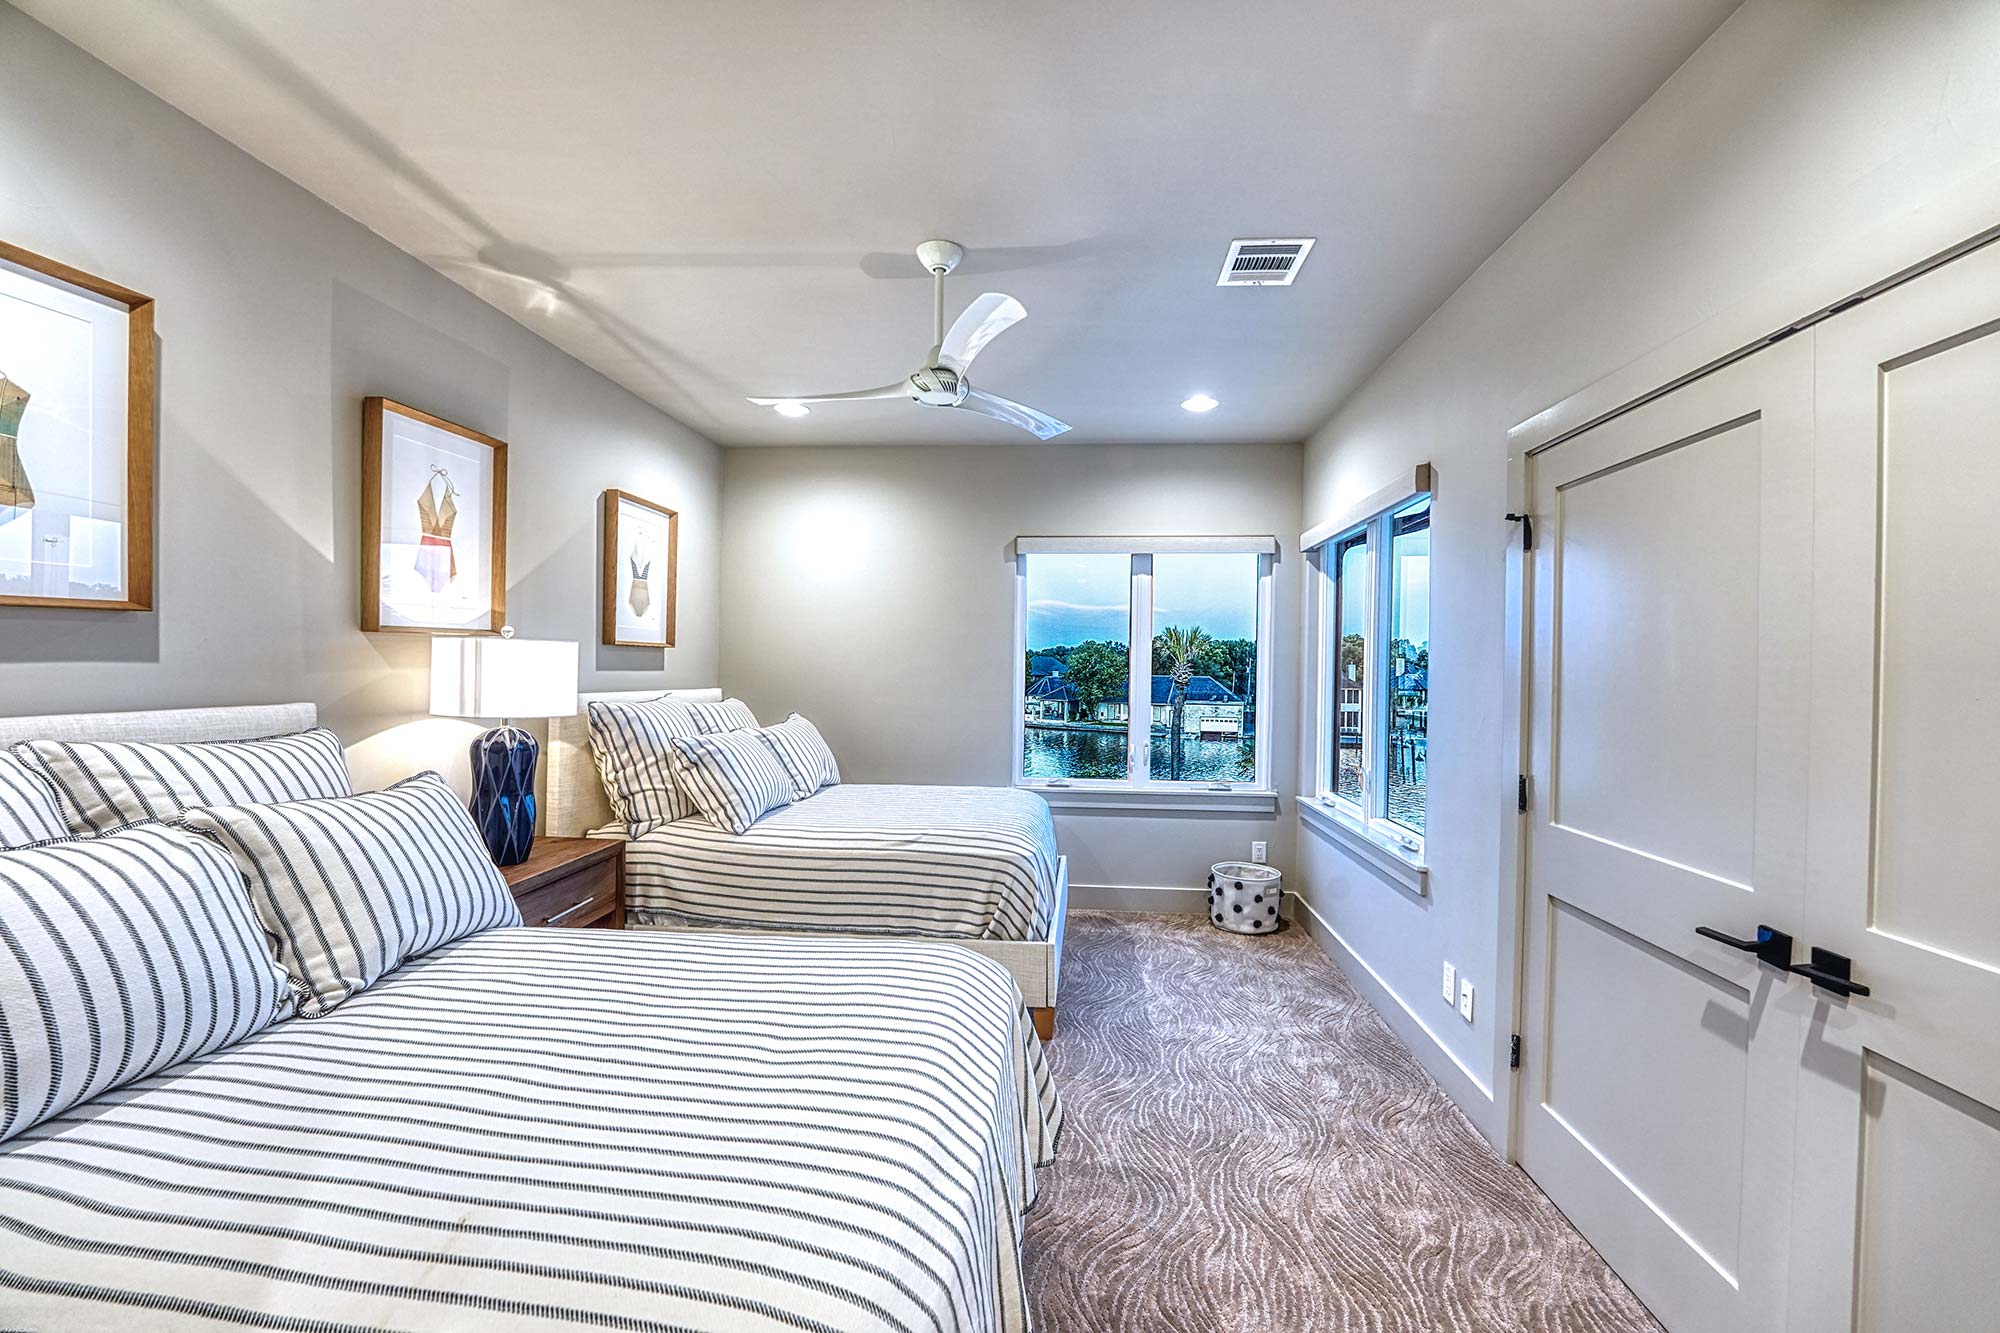 Zbranek and Holt Custom Homes Soft Modern Transitional Guest Room 2 Overlooking Lake and Pool